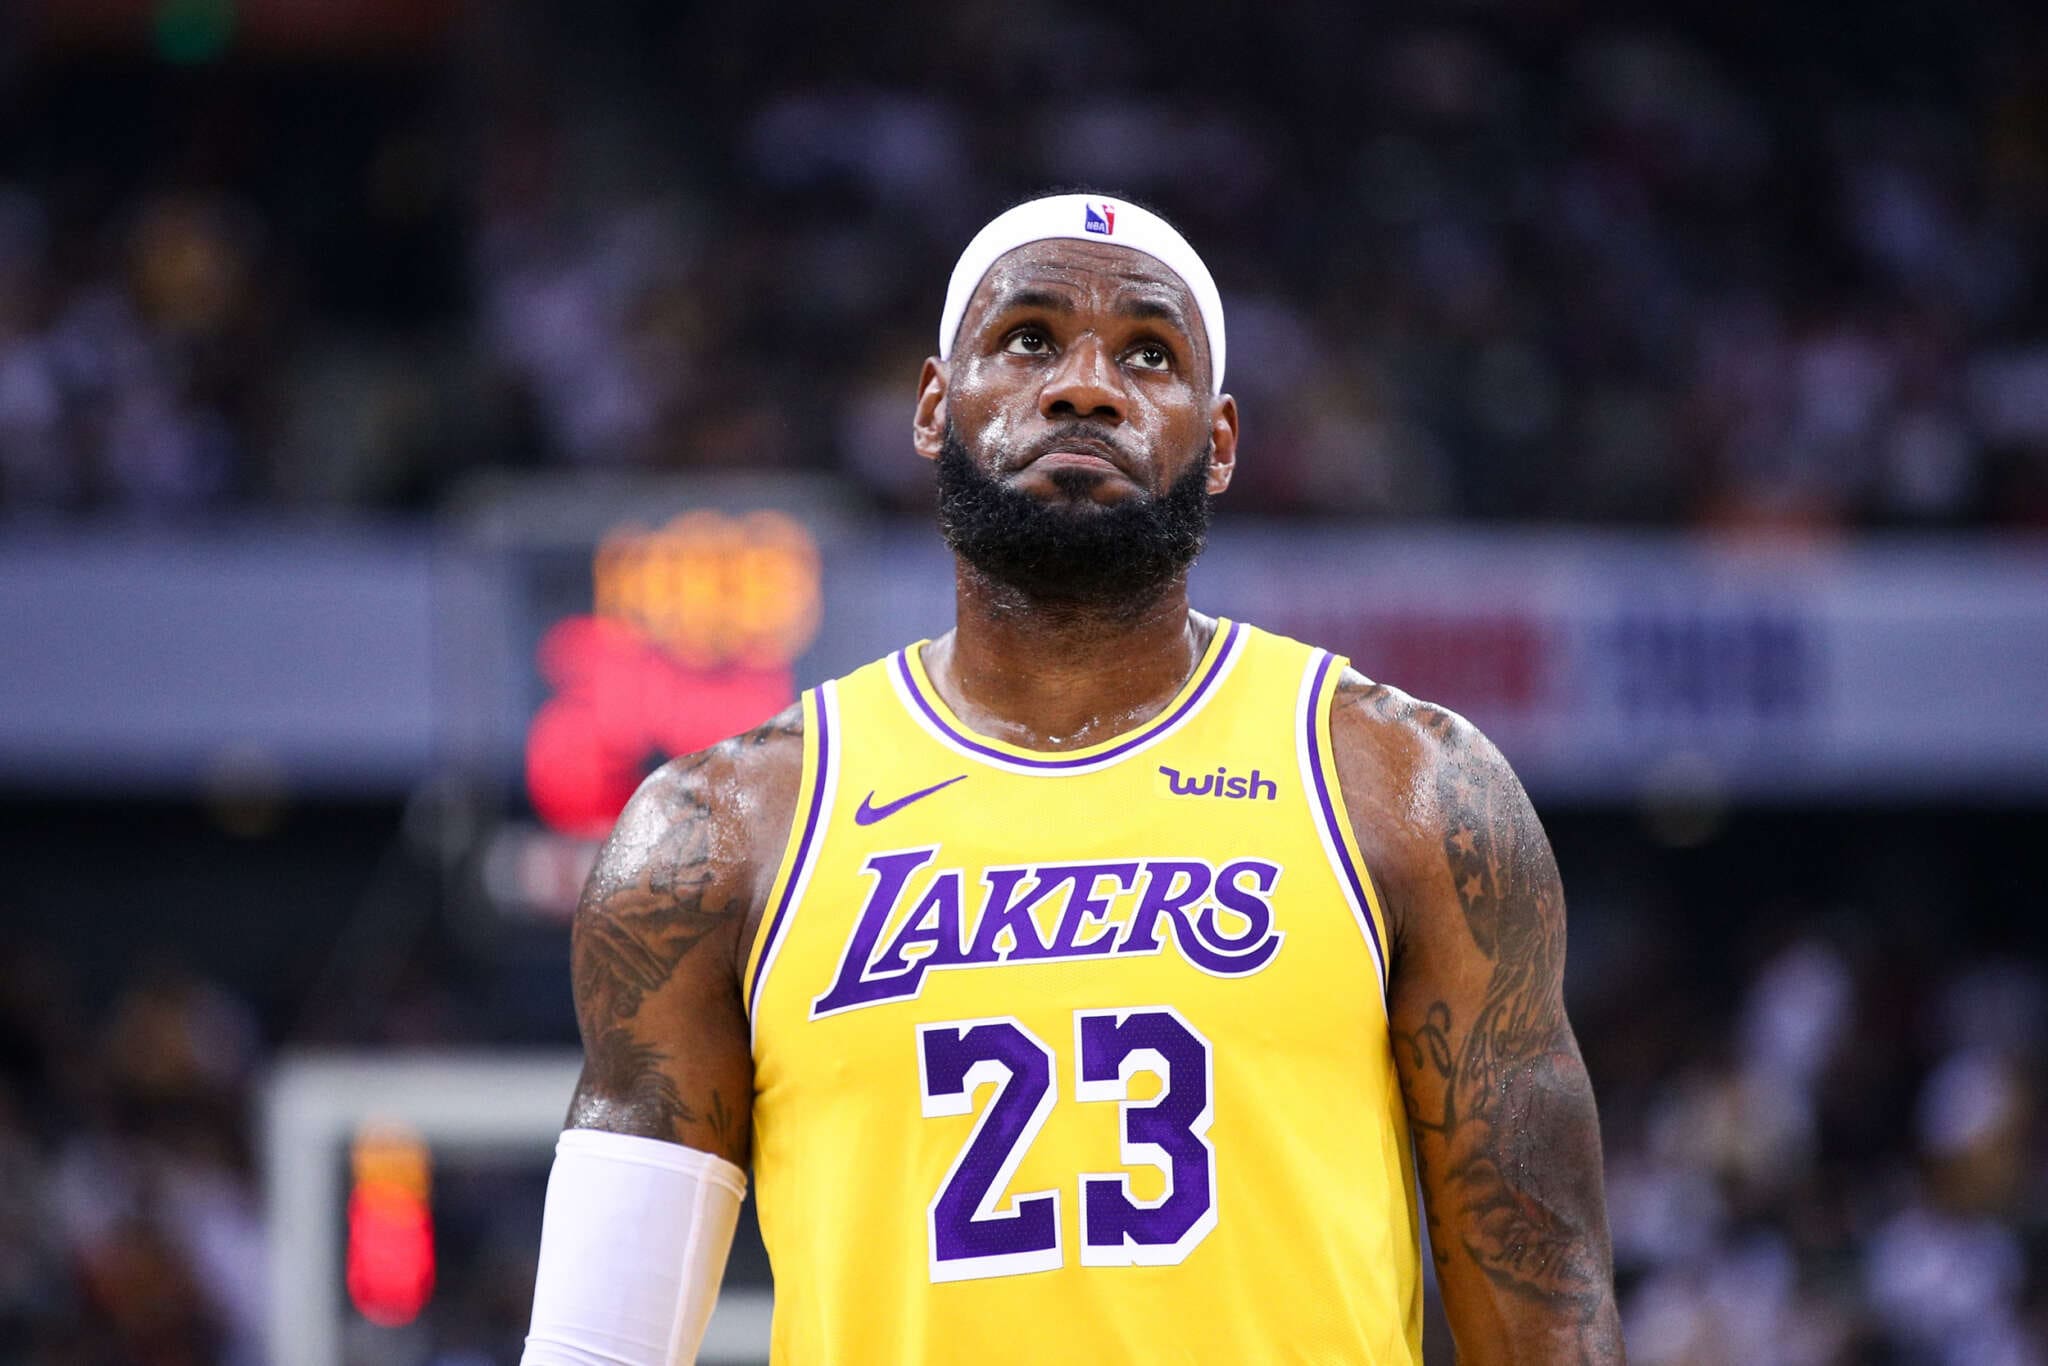 LeBron James Addressed The Recent Incident That Led To Heckler Being Ejected